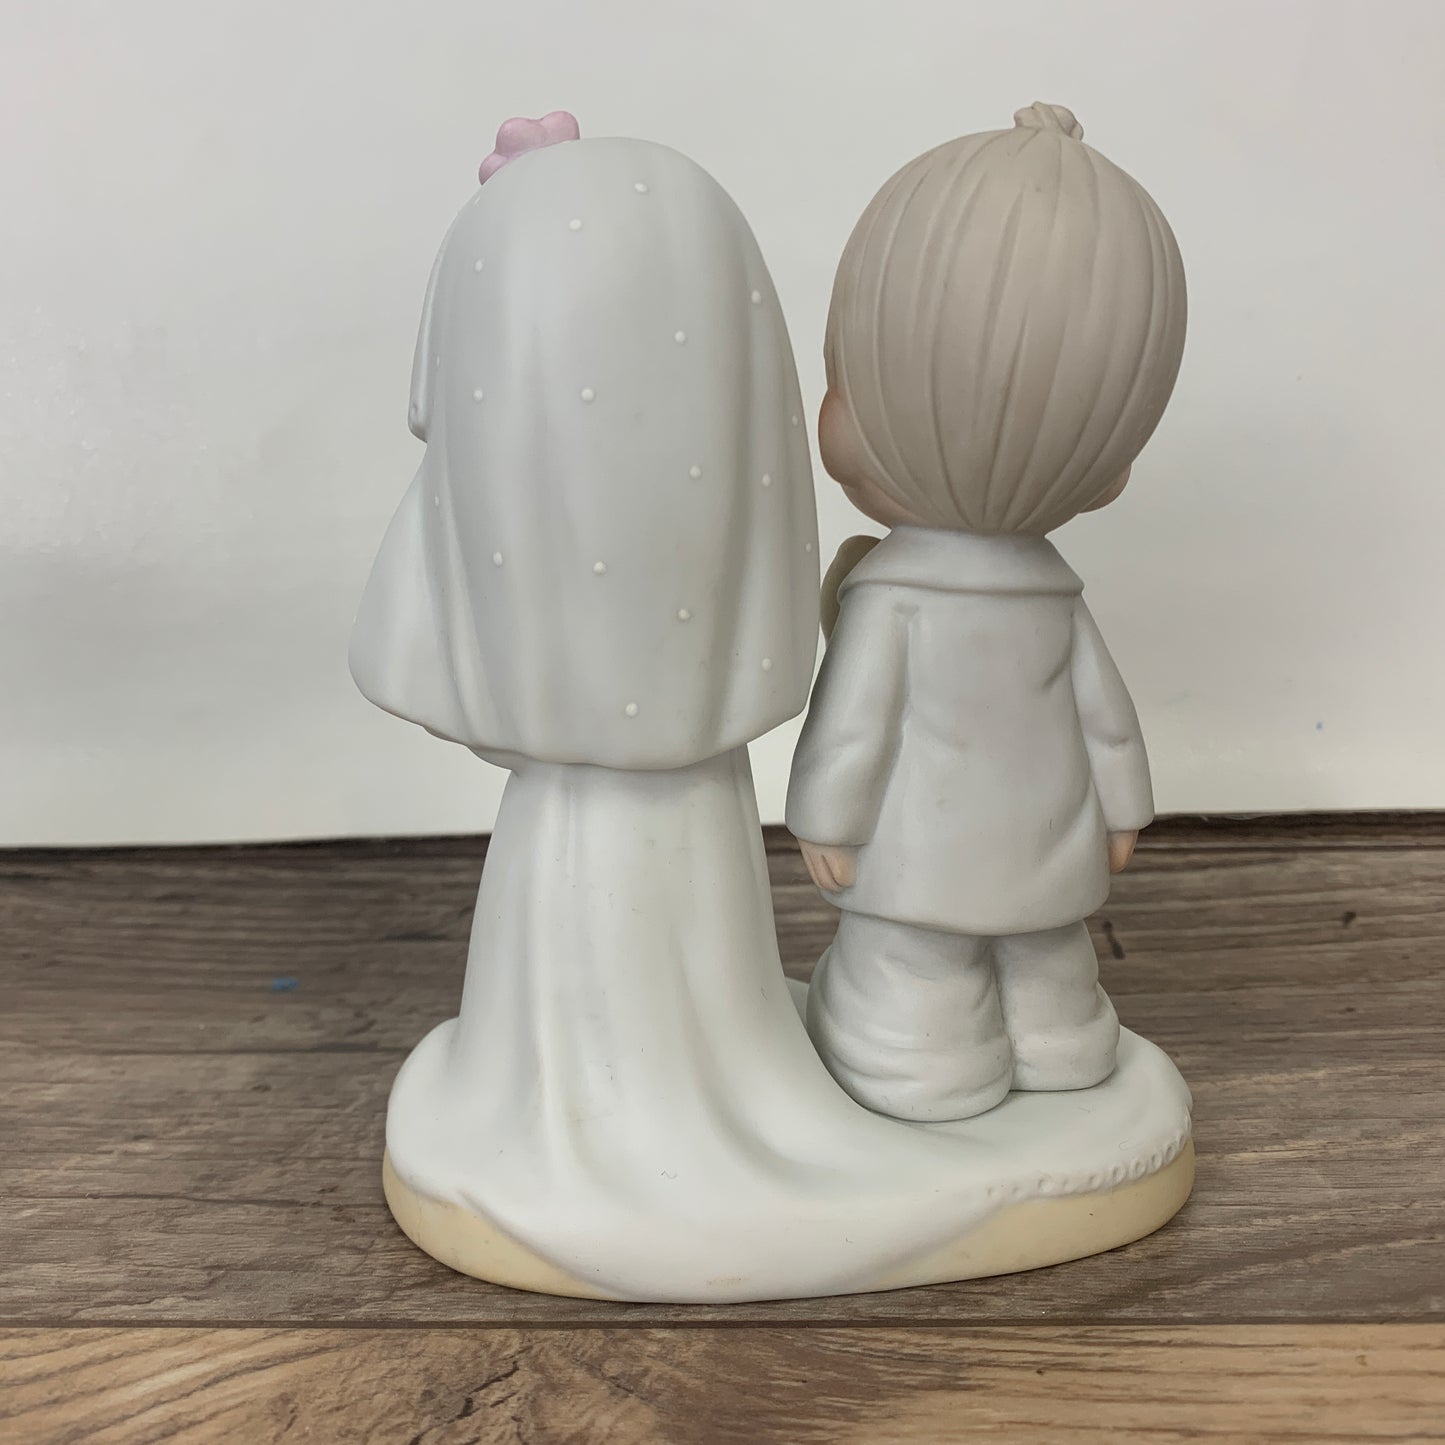 Precious Moments "The Lord Bless you and Keep You" 1979 Figurine Vintage Wedding Gift